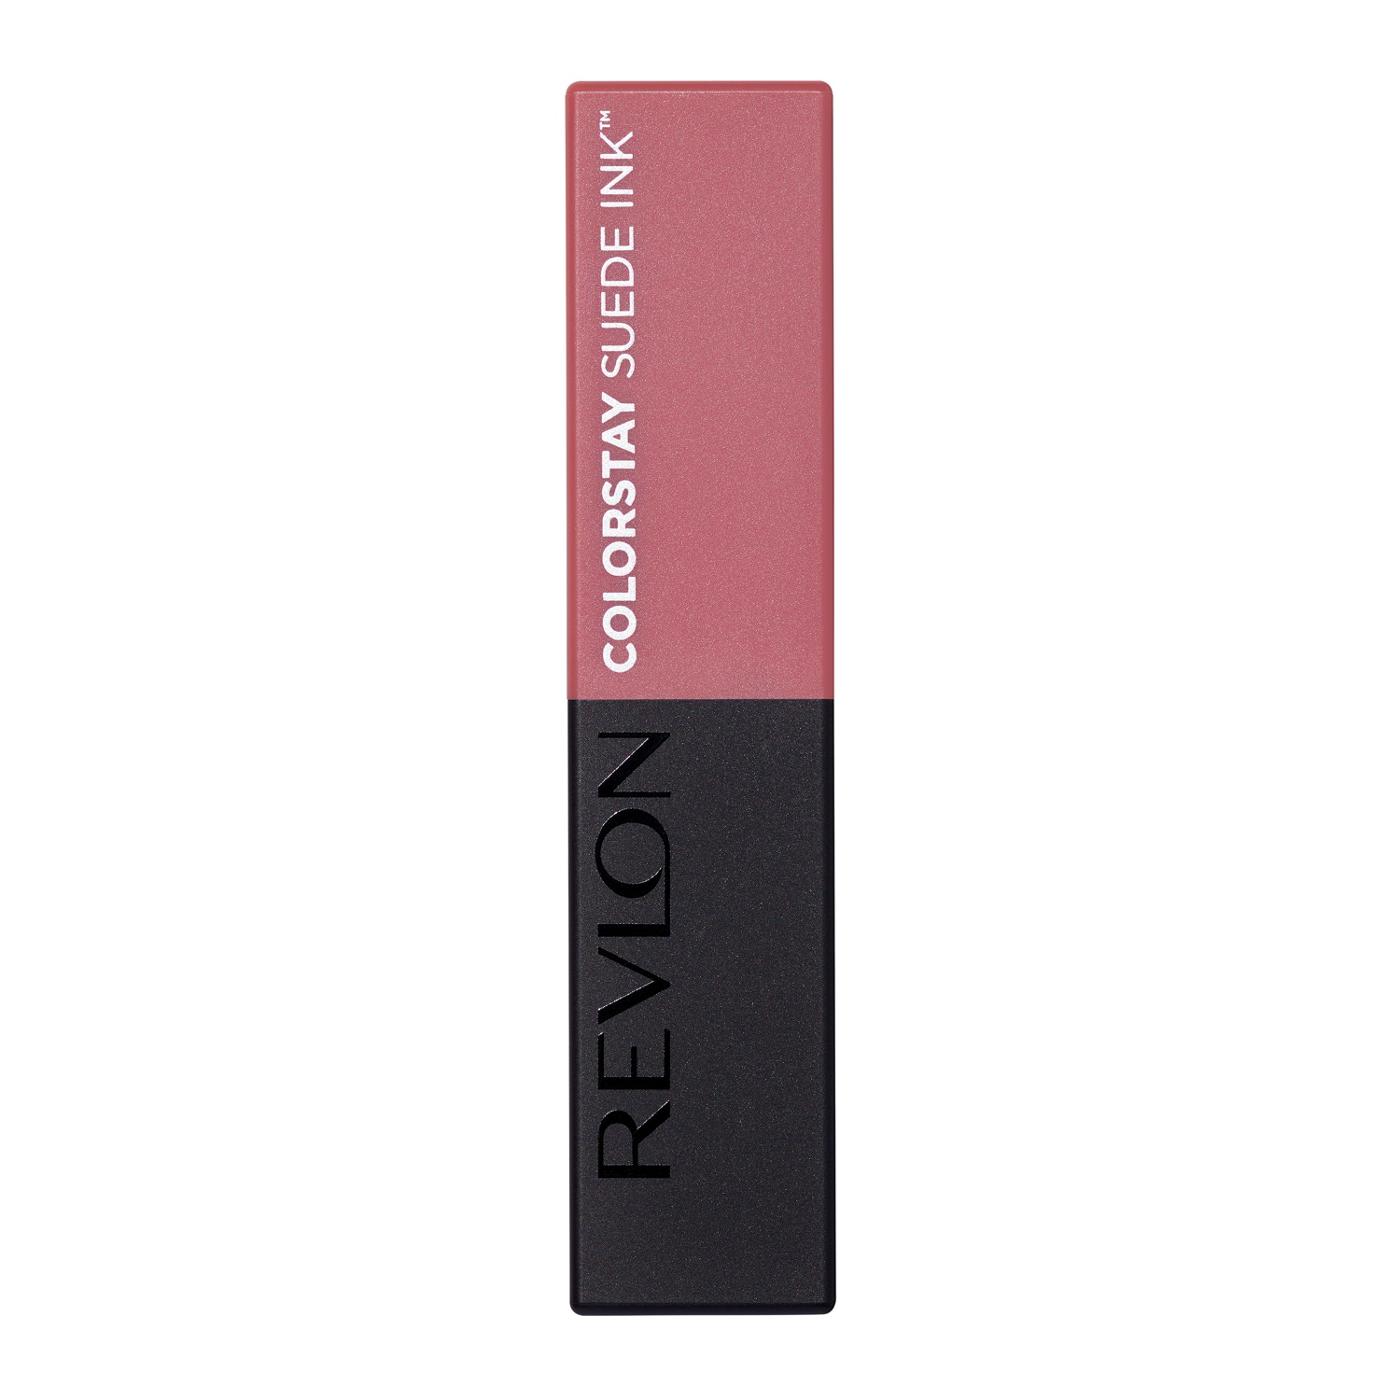 Revlon ColorStay Suede Ink Lipstick - That Girl; image 1 of 5